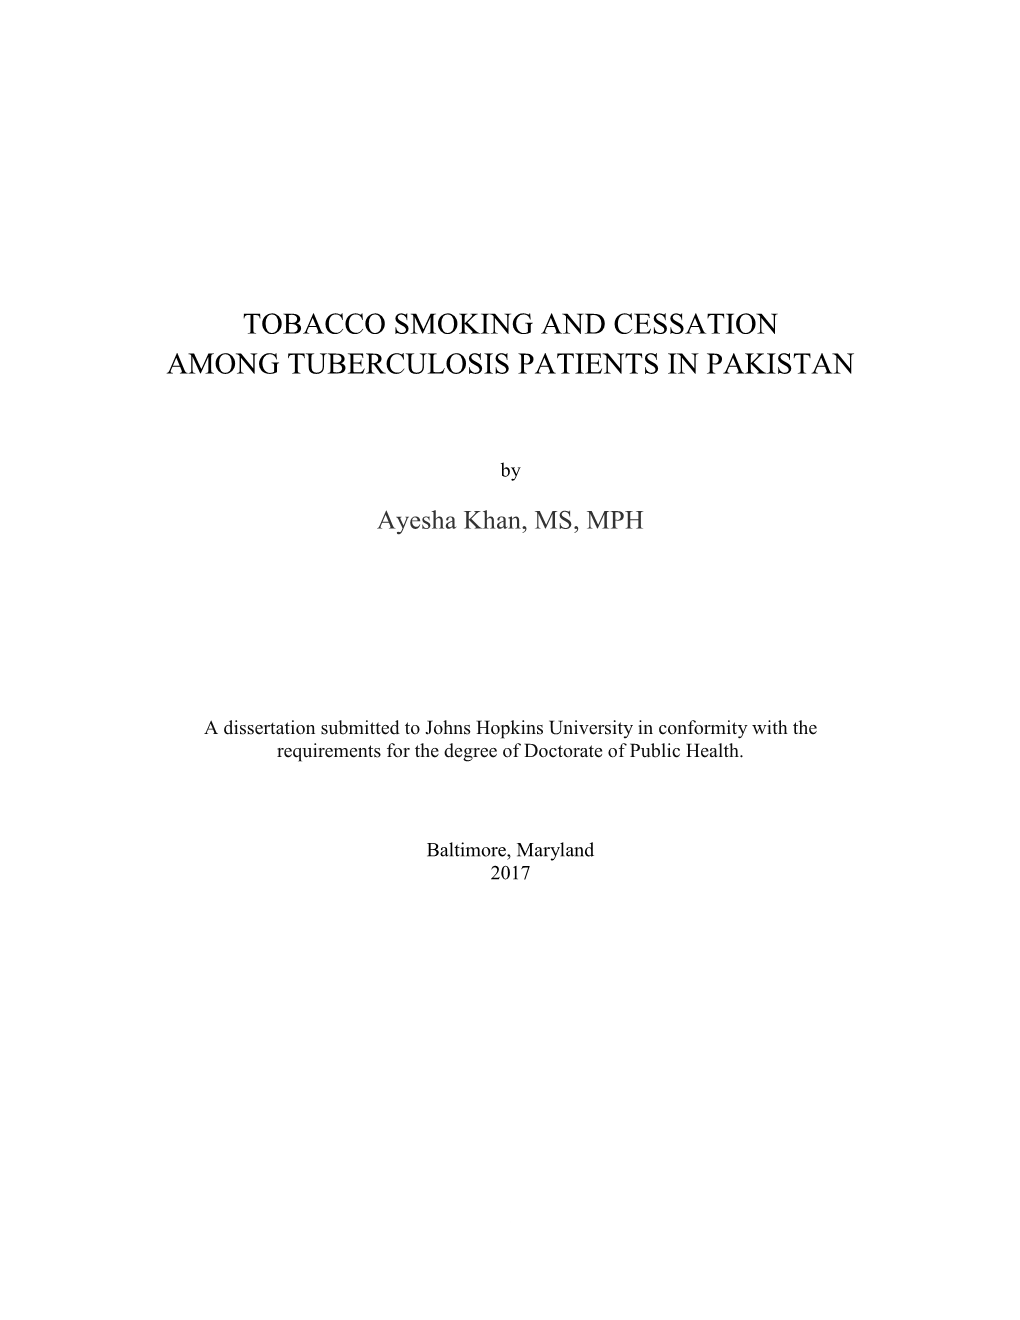 Tobacco Smoking and Cessation Among Tuberculosis Patients in Pakistan